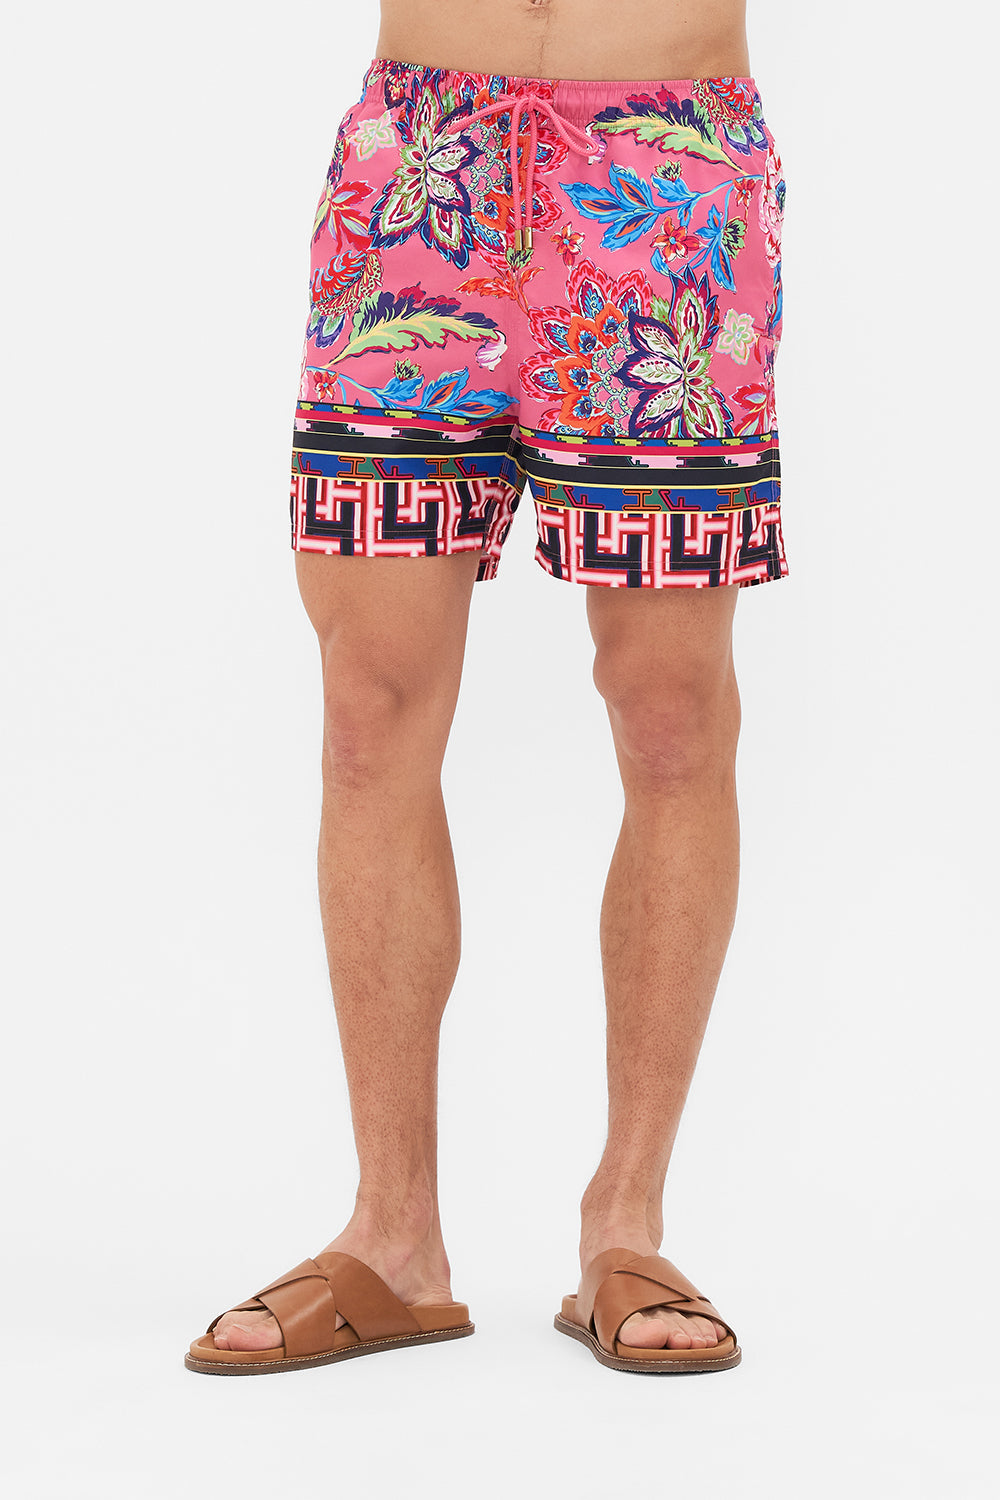 Crop view of model wering HOTEL FRANKS BY CAMILLA mens boardshort in Rome Retro print